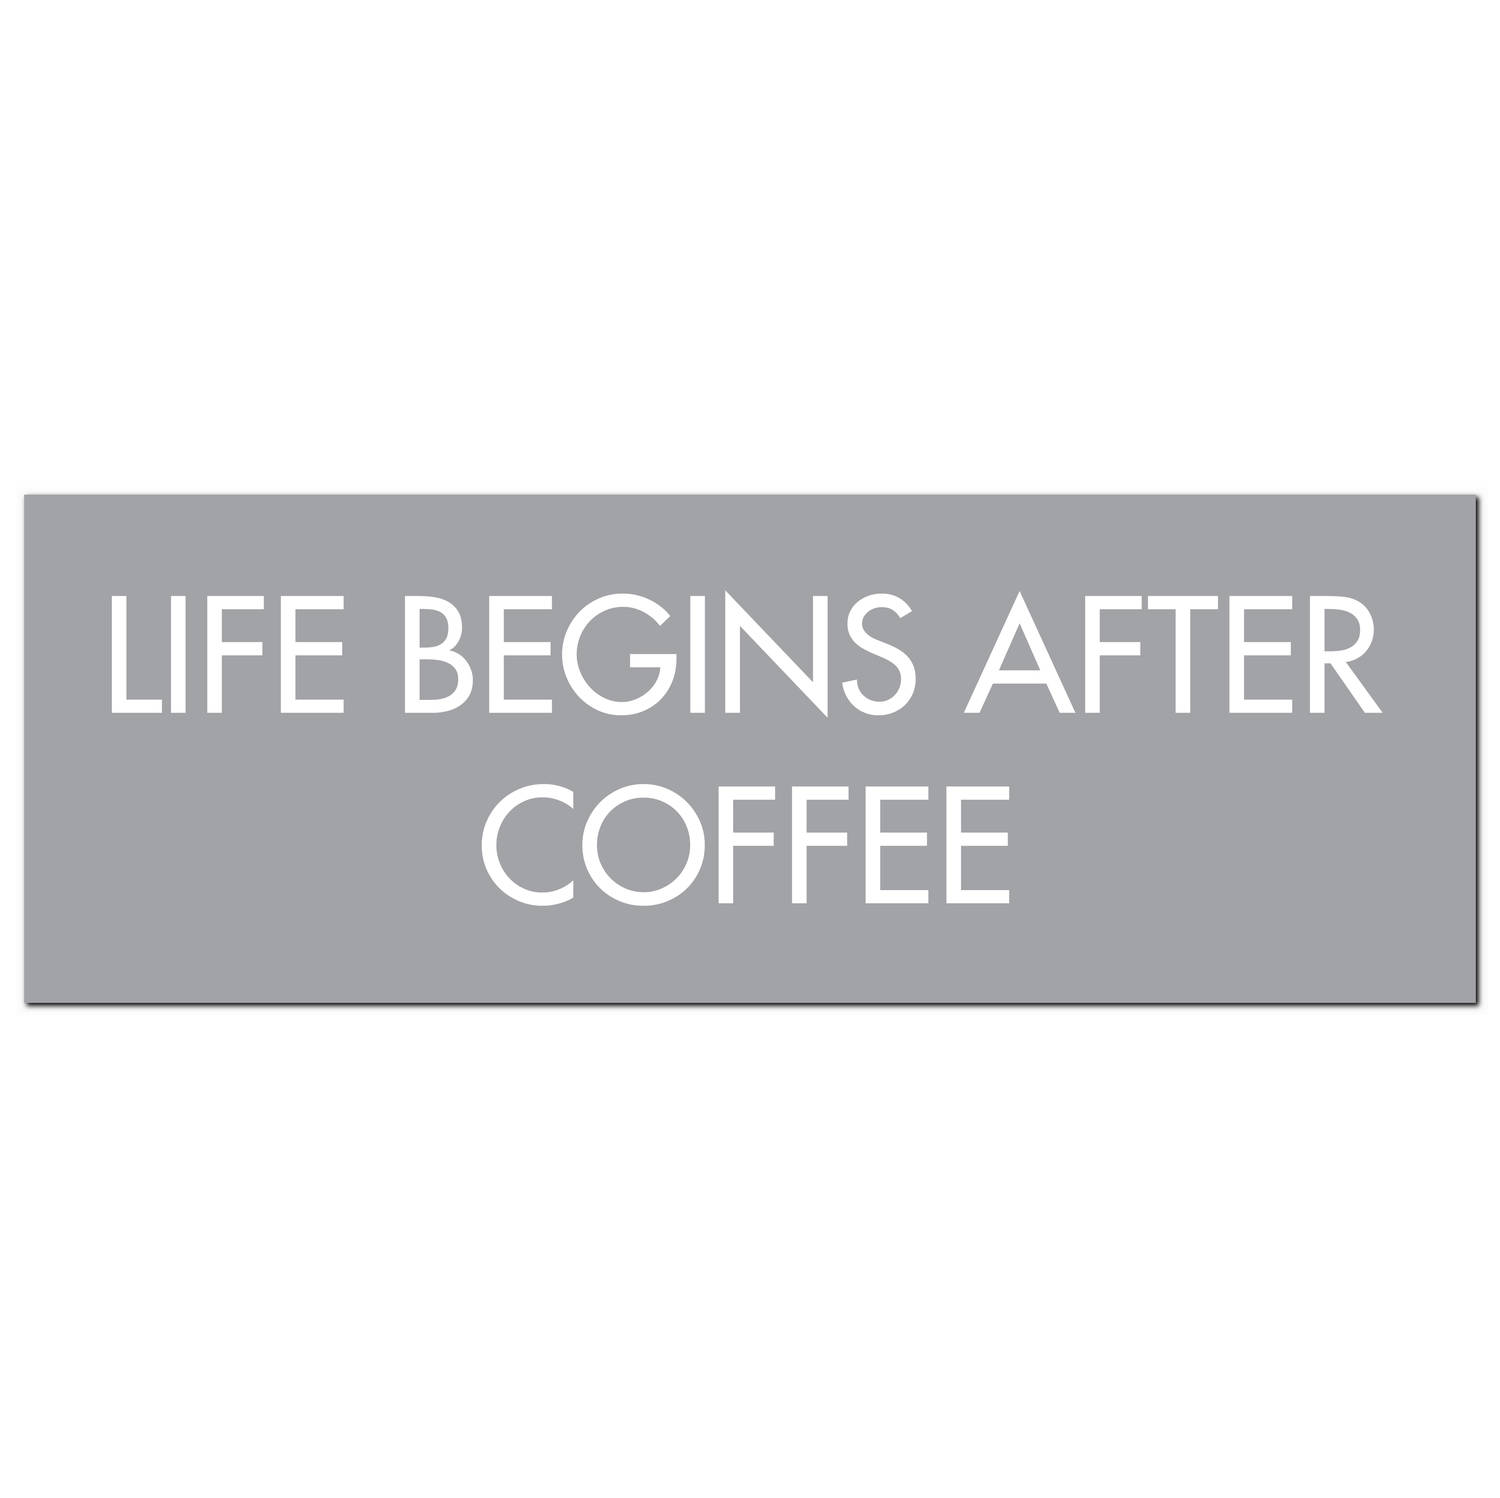 Life Begins After Coffee Silver Foil Plaque - Image 1